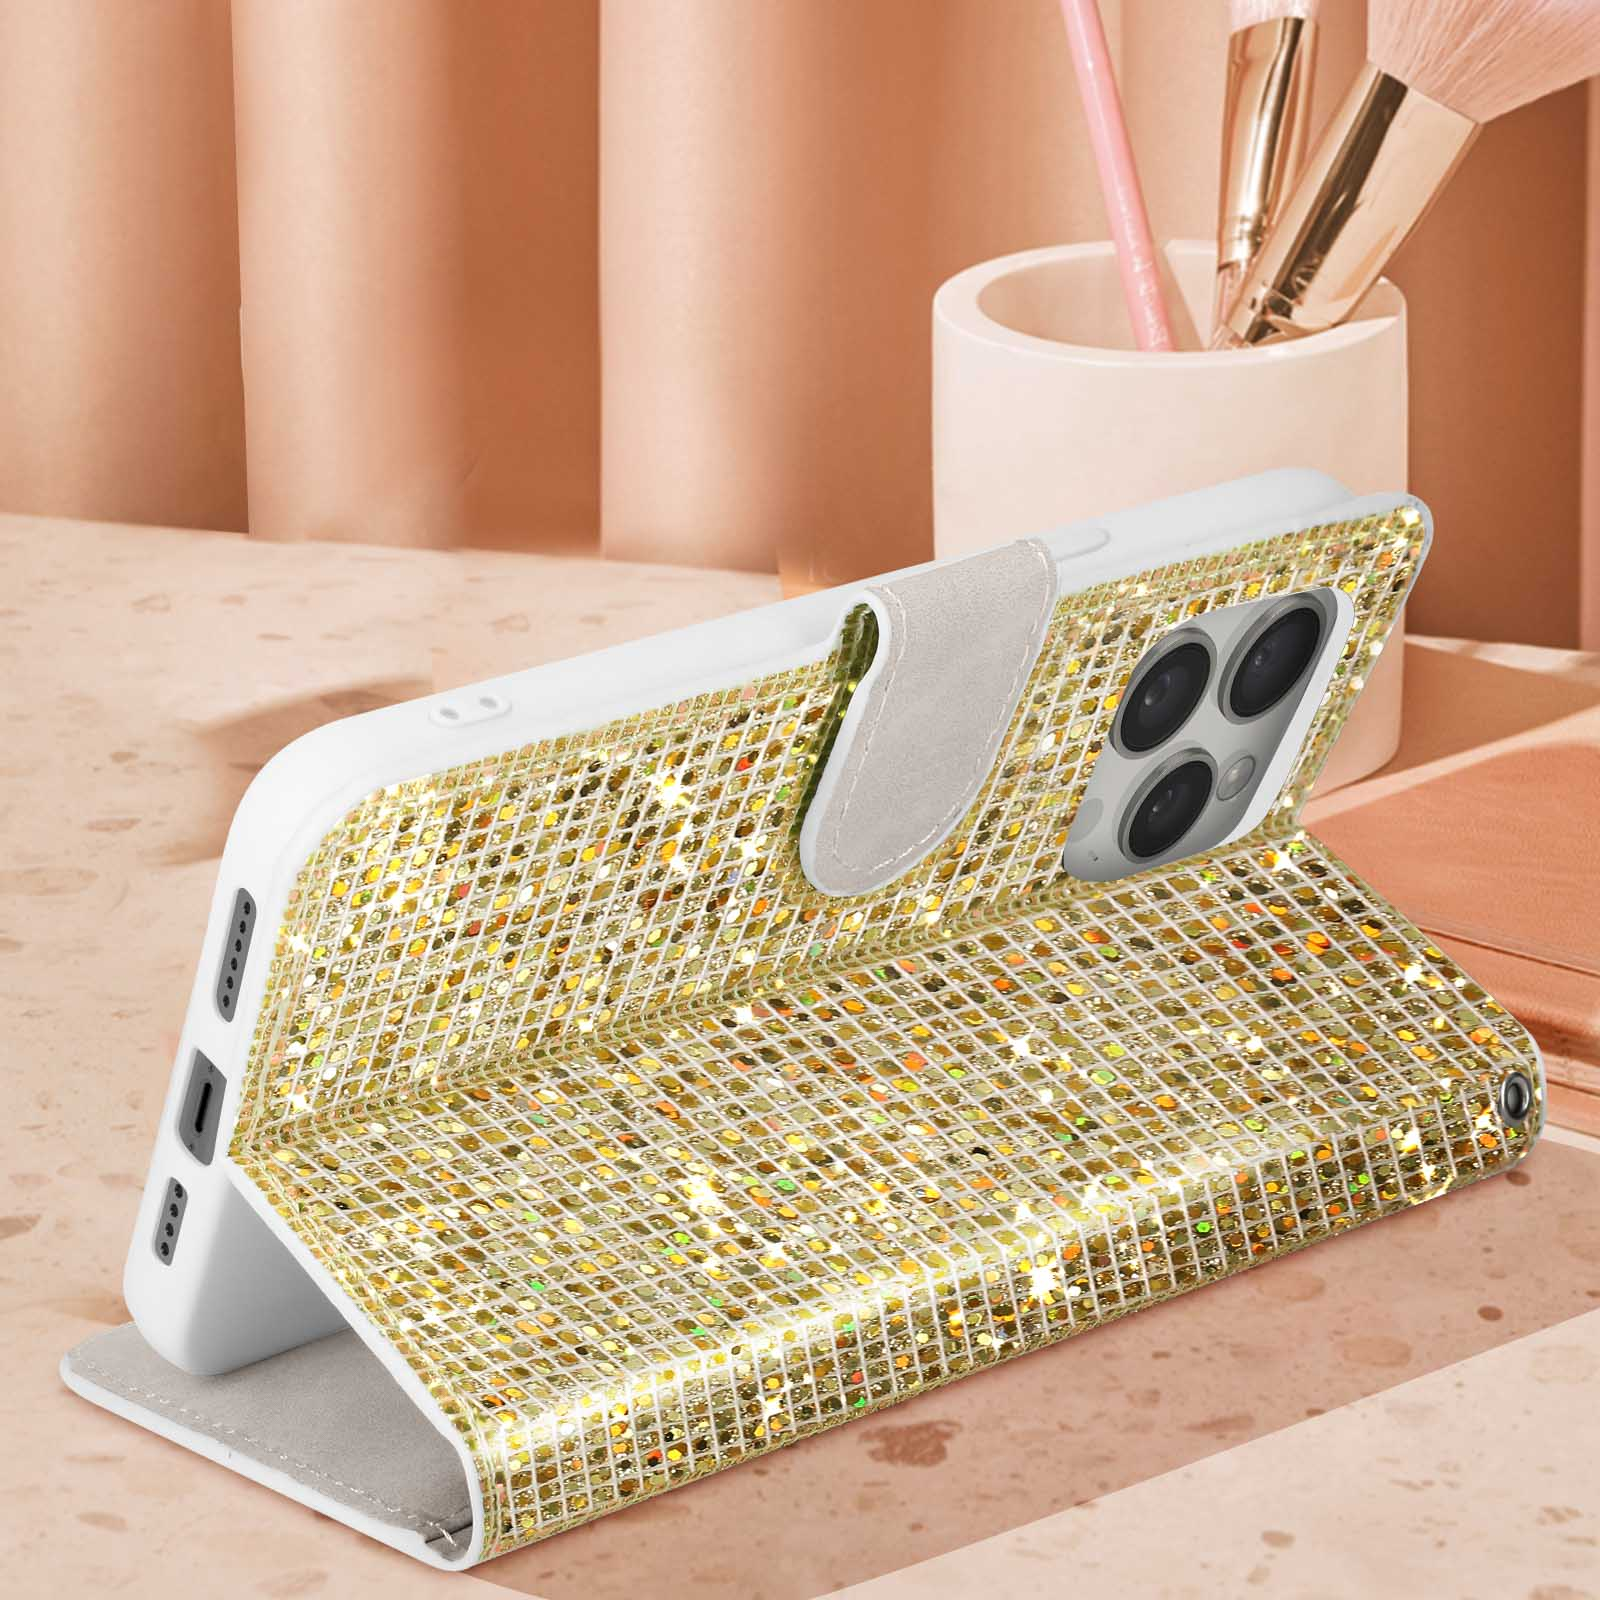 AVIZAR Pro, Apple, Bookcover, Series, Glam 15 Disco Gold Edition iPhone